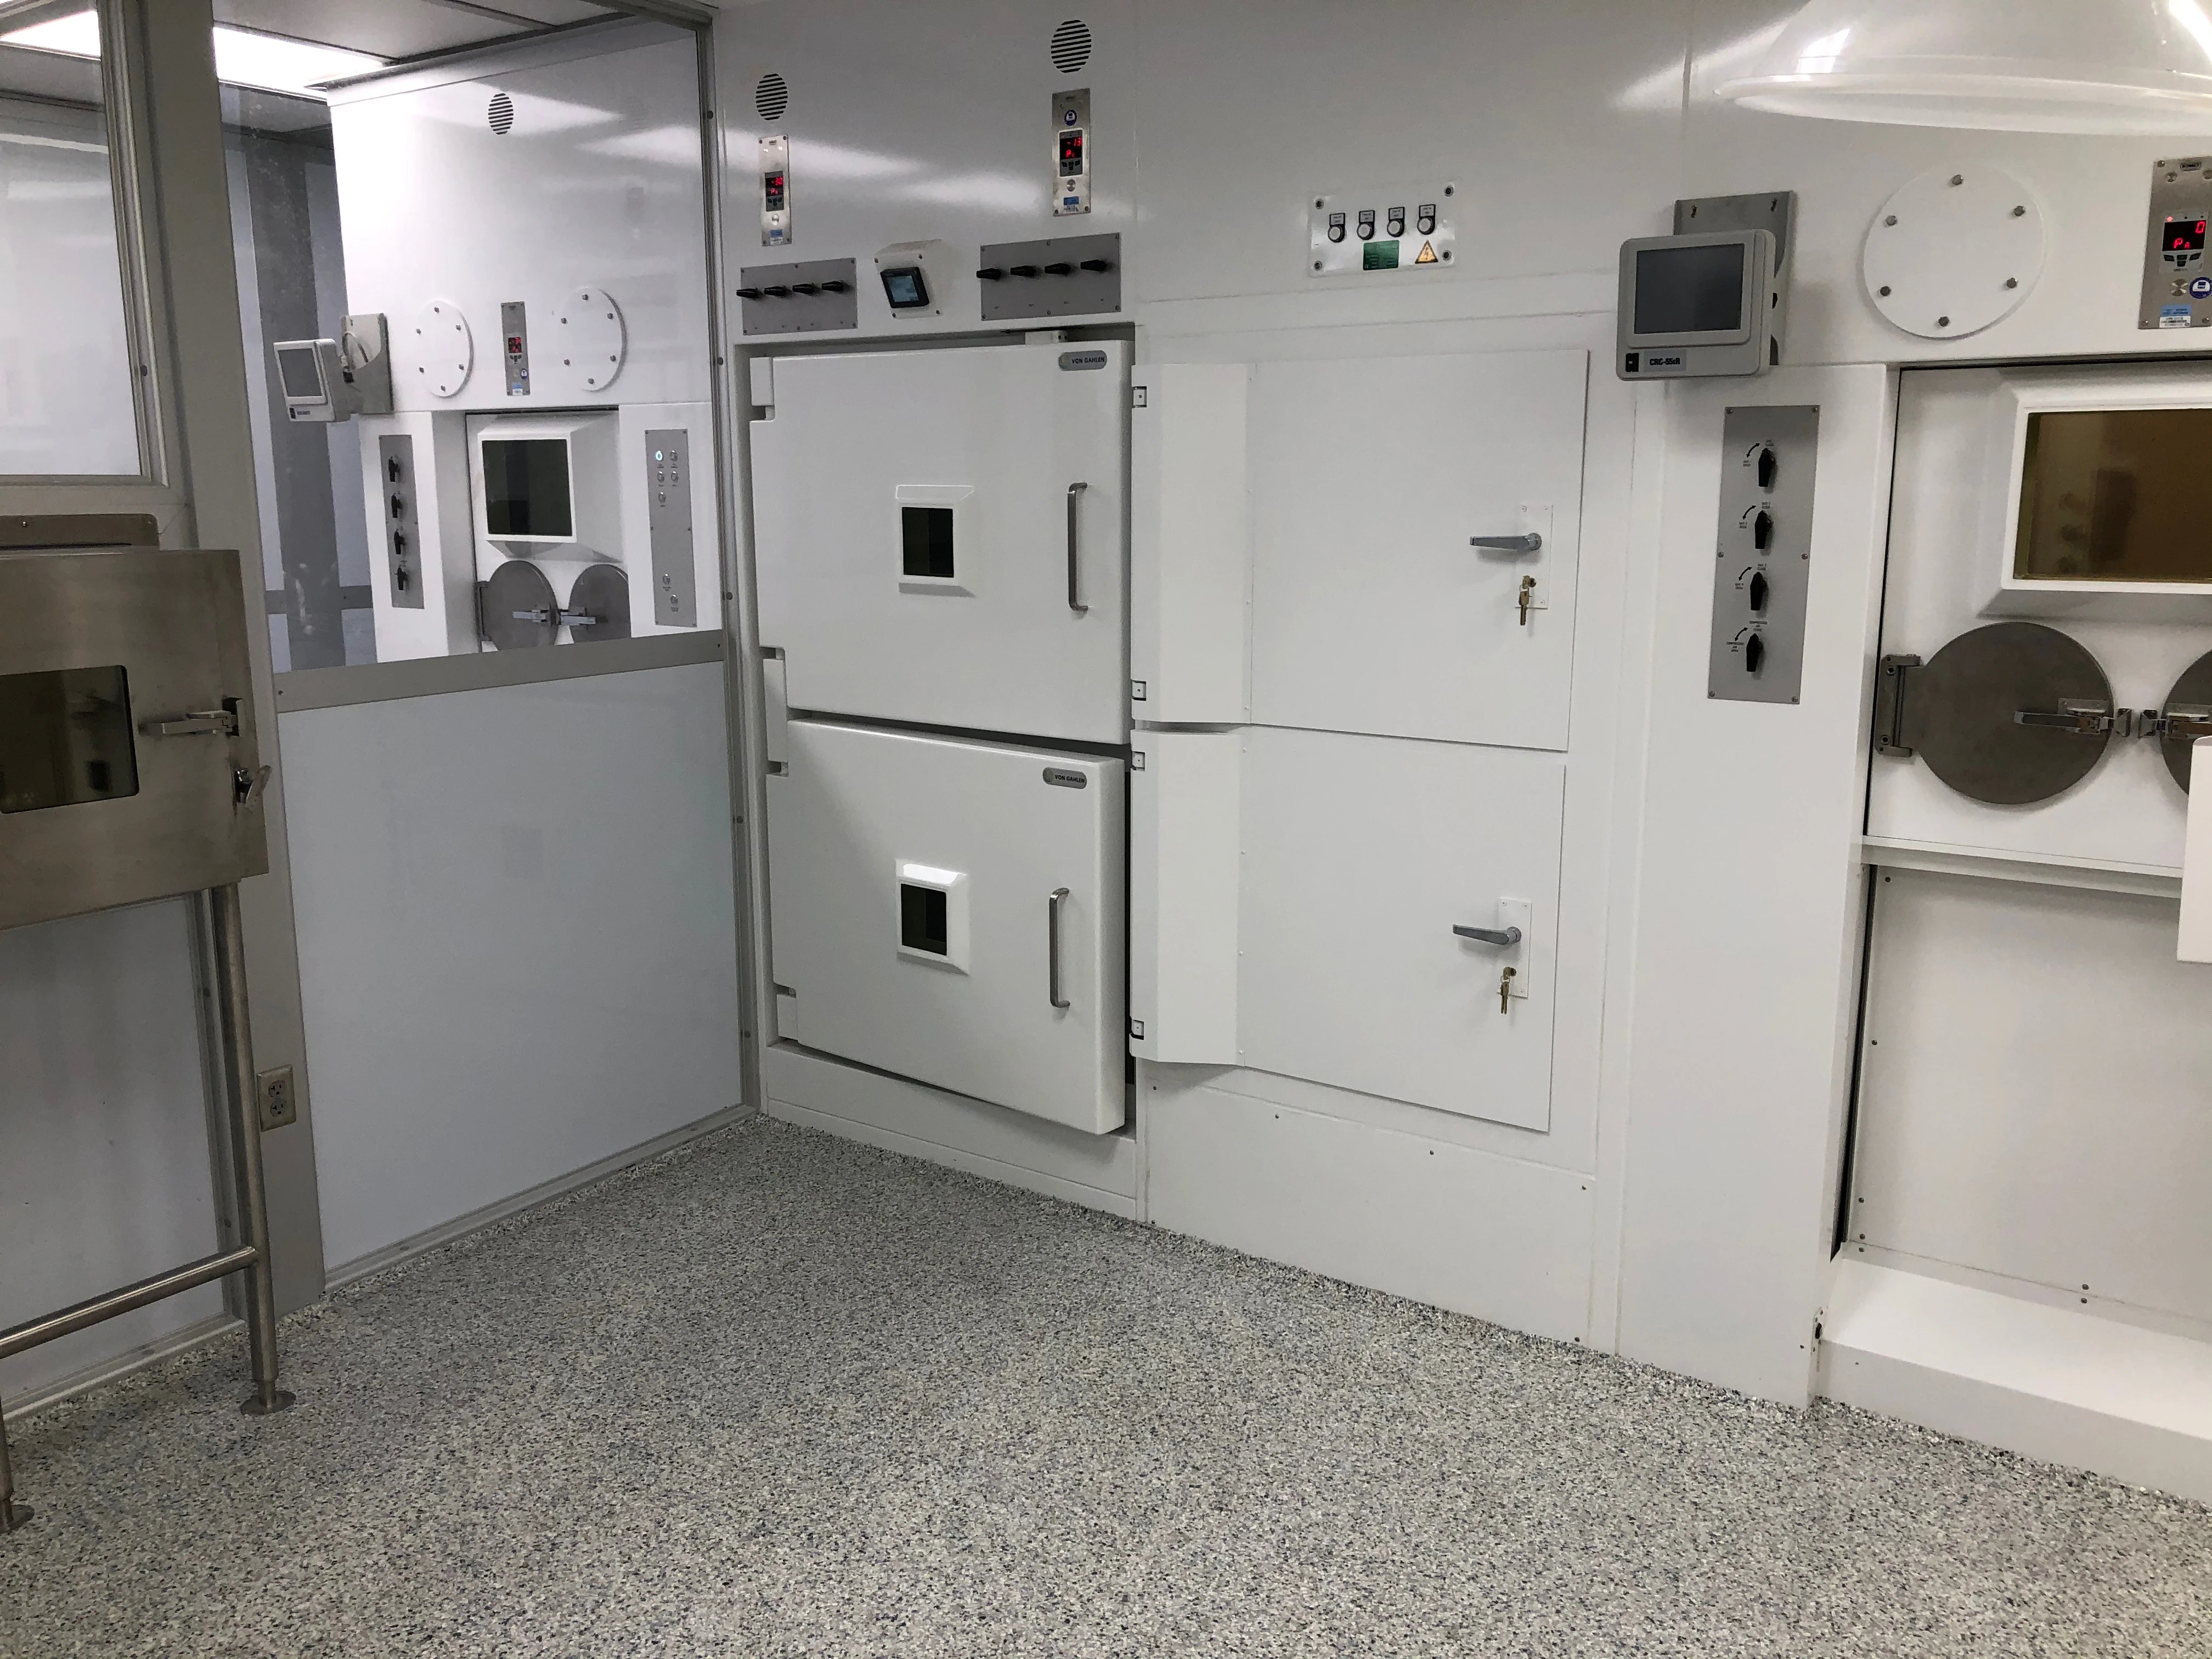 A photograph from inside MSU’s new radiopharmacy shows white cabinets and chambers with screens where researchers will store and work with radioisotopes.